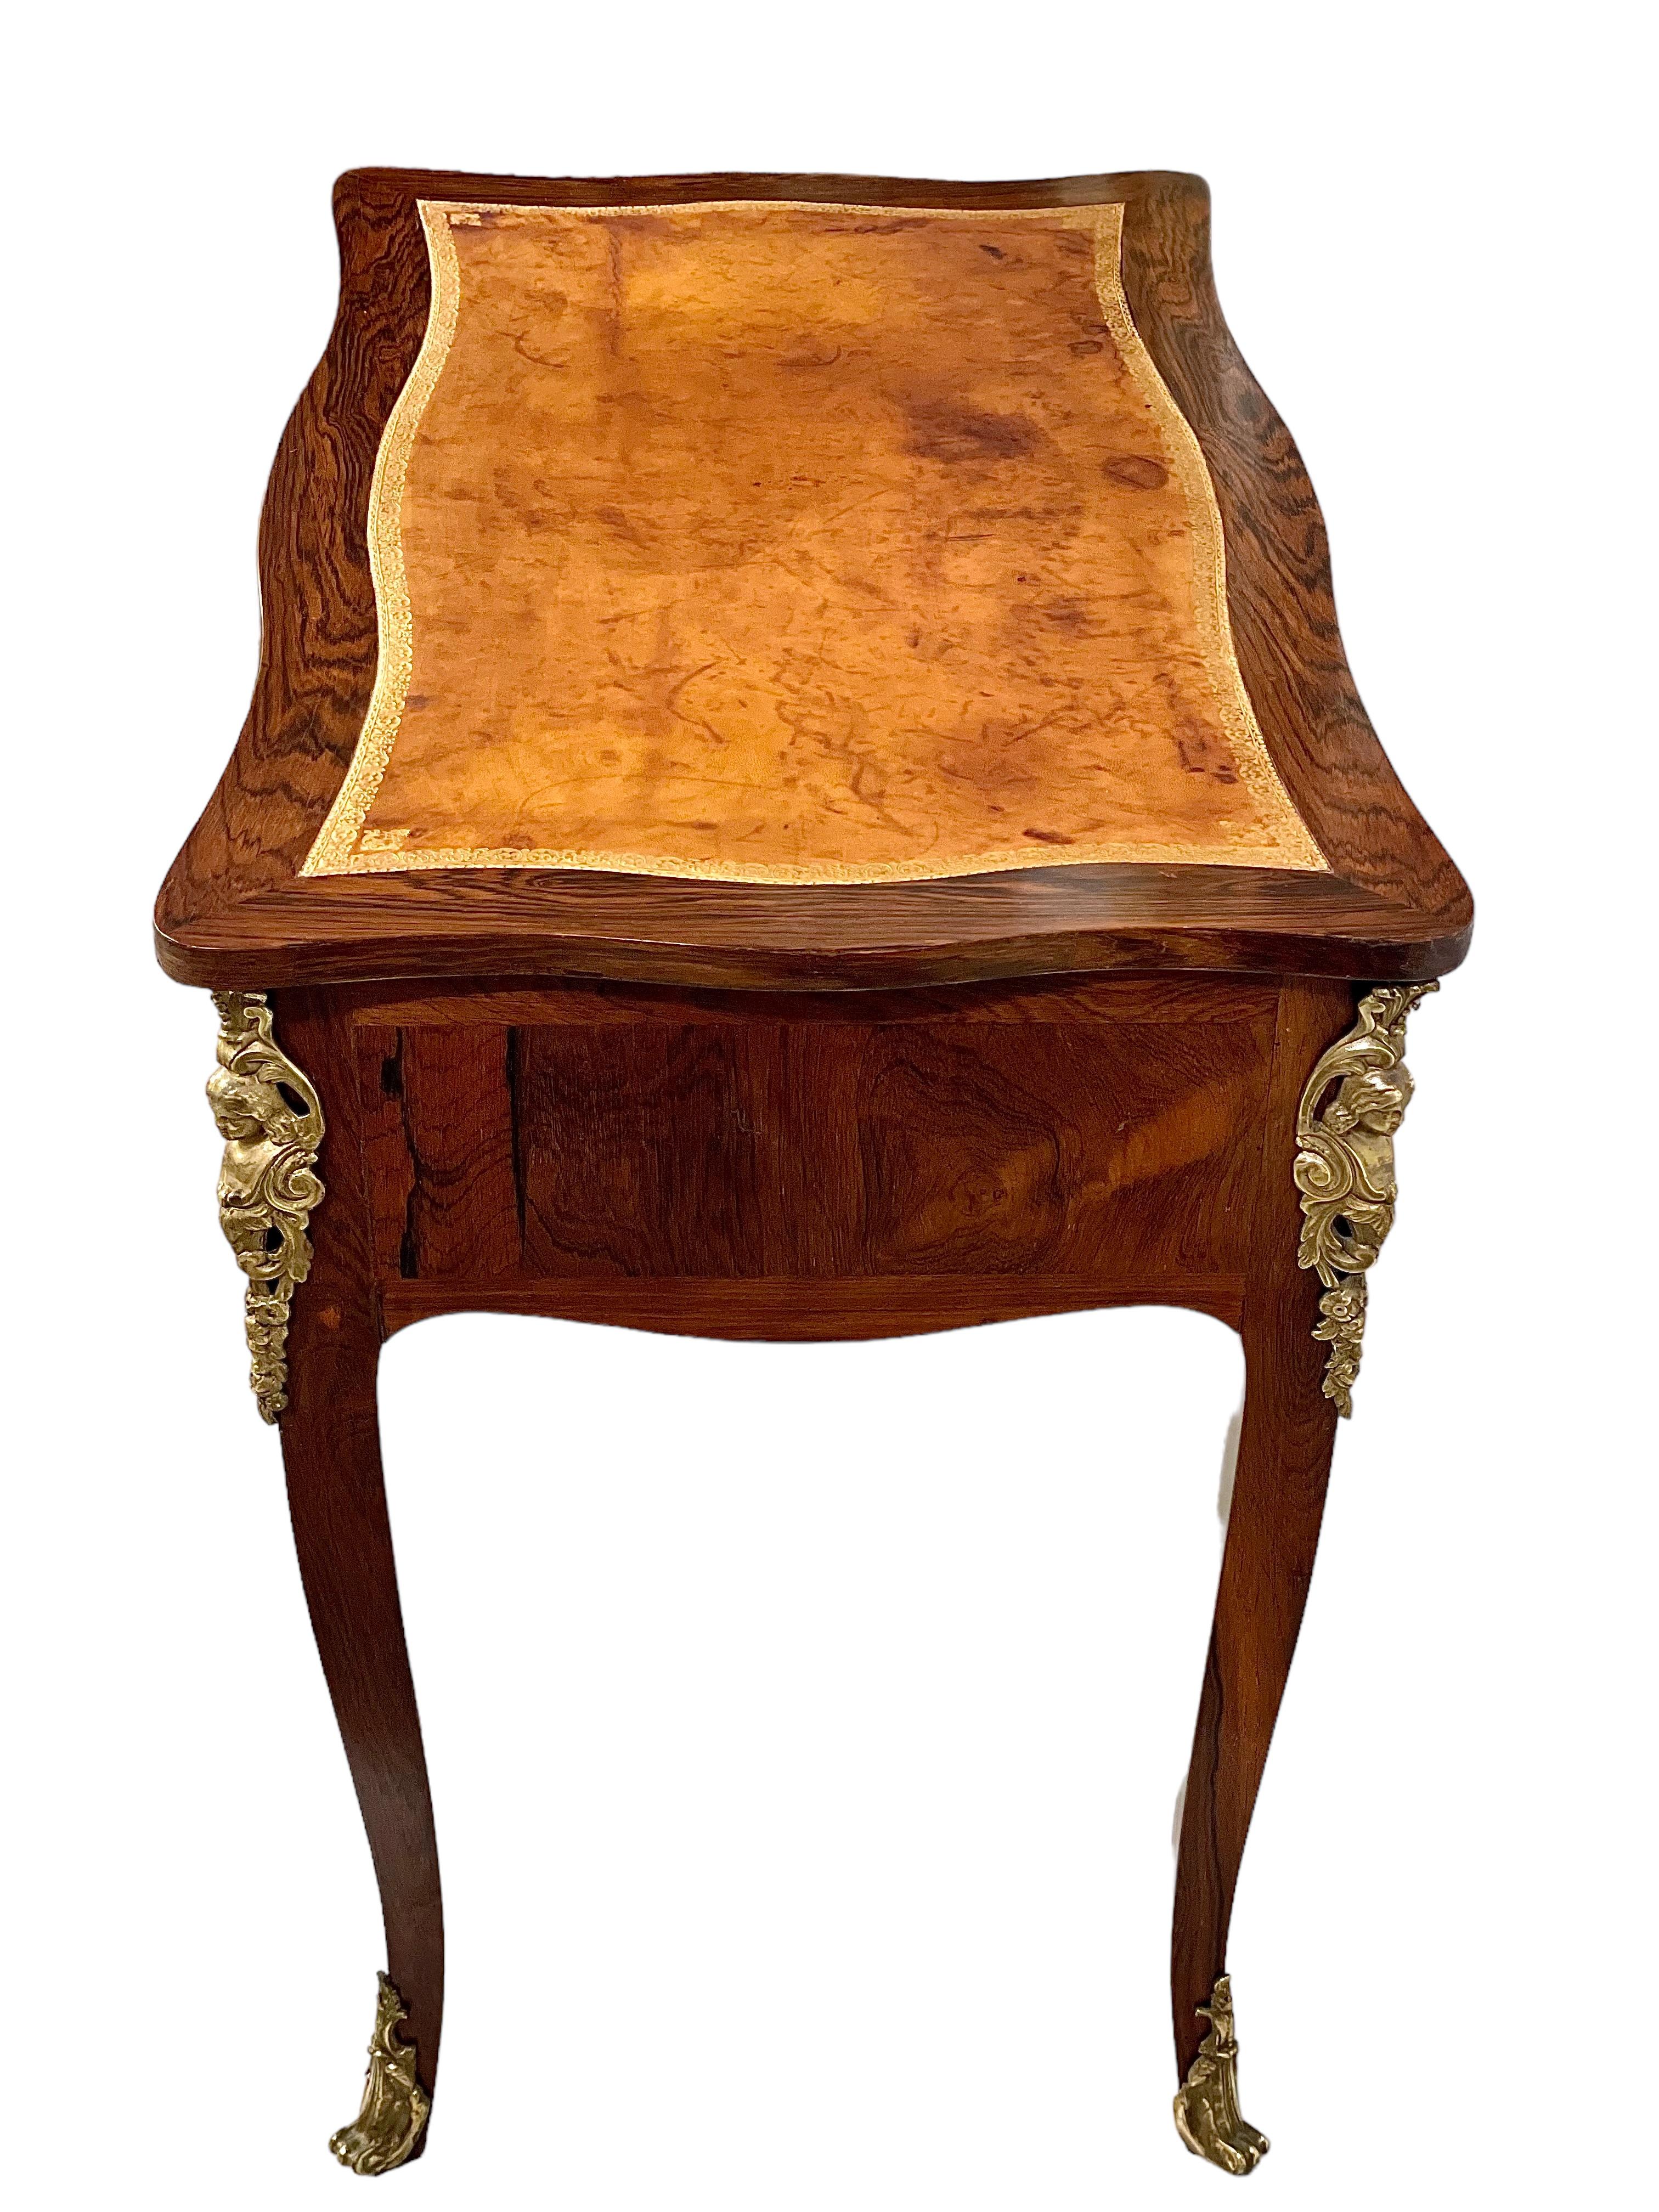 Dating back to the Louis XV period, this exquisite petite writing table bears the hallmark of Delorme (Adrien Delorme, granted the title of Maître on 22/06/1748). Functioning as a writing table or lady's bureau, it boasts marquetry craftsmanship and